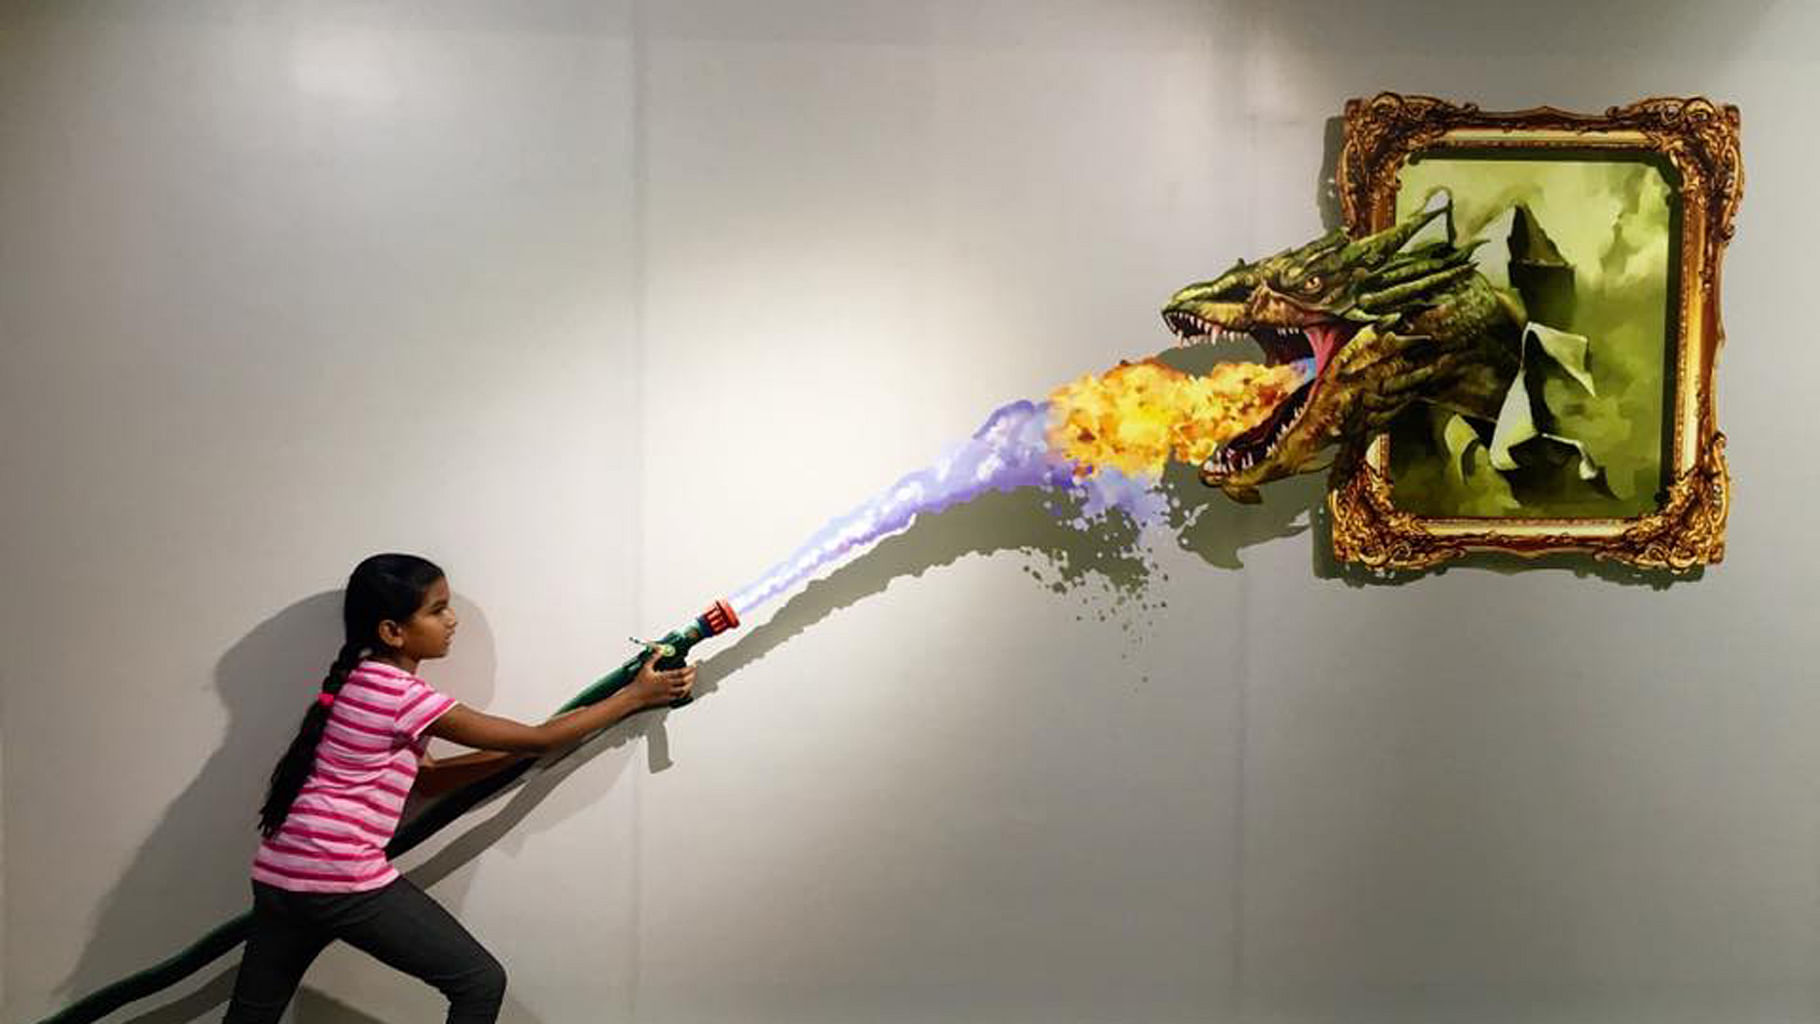 Stop that dragon from making you charcoal! (Photo: Click Art Museum’s Facebook <a href="https://www.facebook.com/clickartmuseum">page</a>)